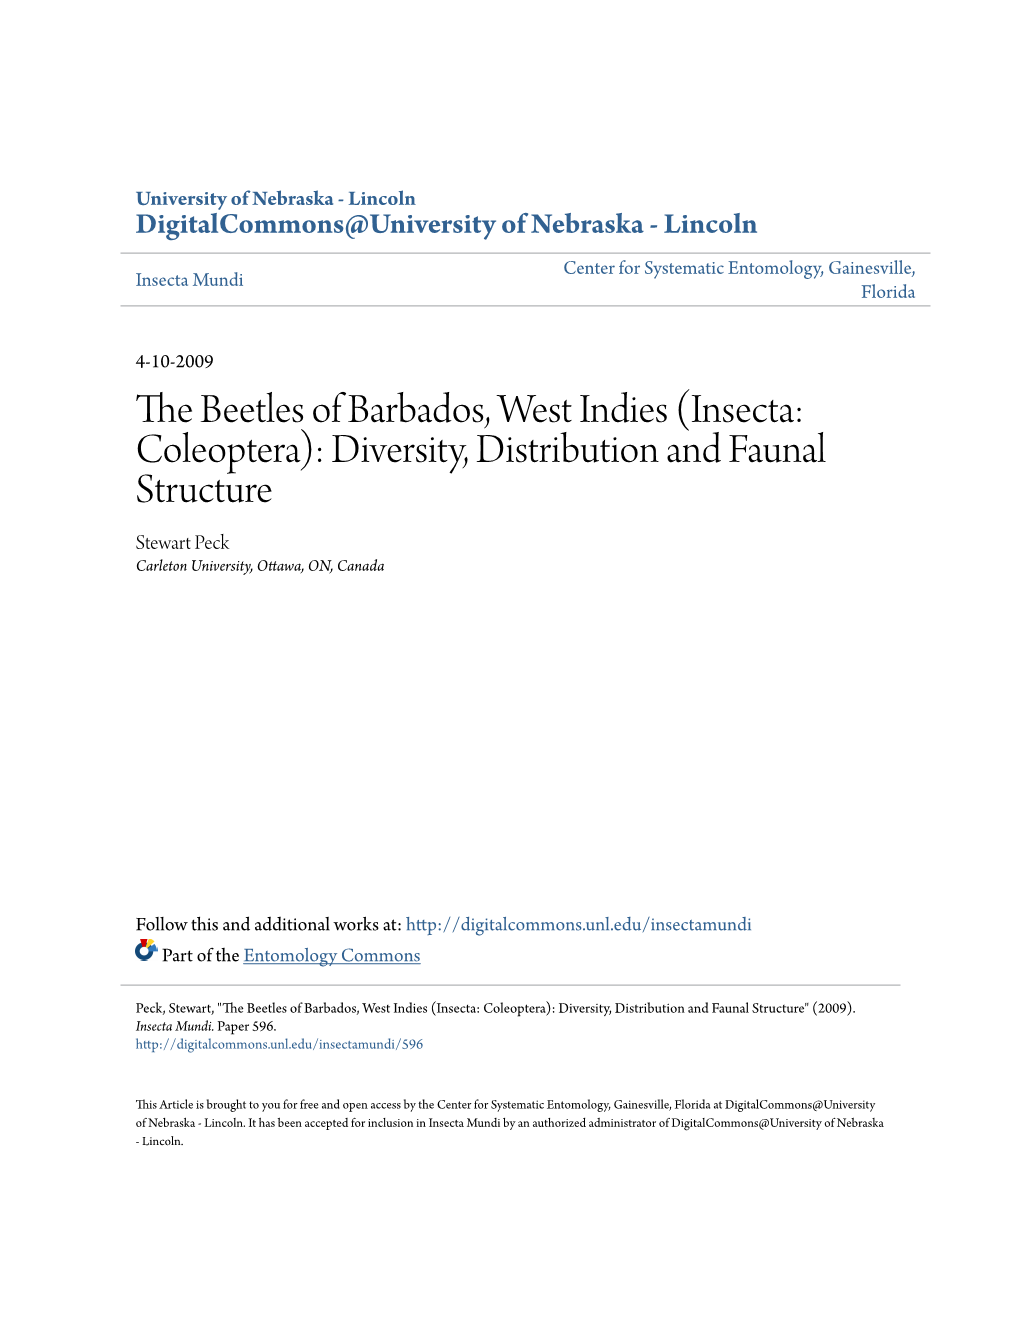 The Beetles of Barbados, West Indies (Insecta: Coleoptera): Diversity, Distribution and Faunal Structure Stewart Peck Carleton University, Ottawa, ON, Canada